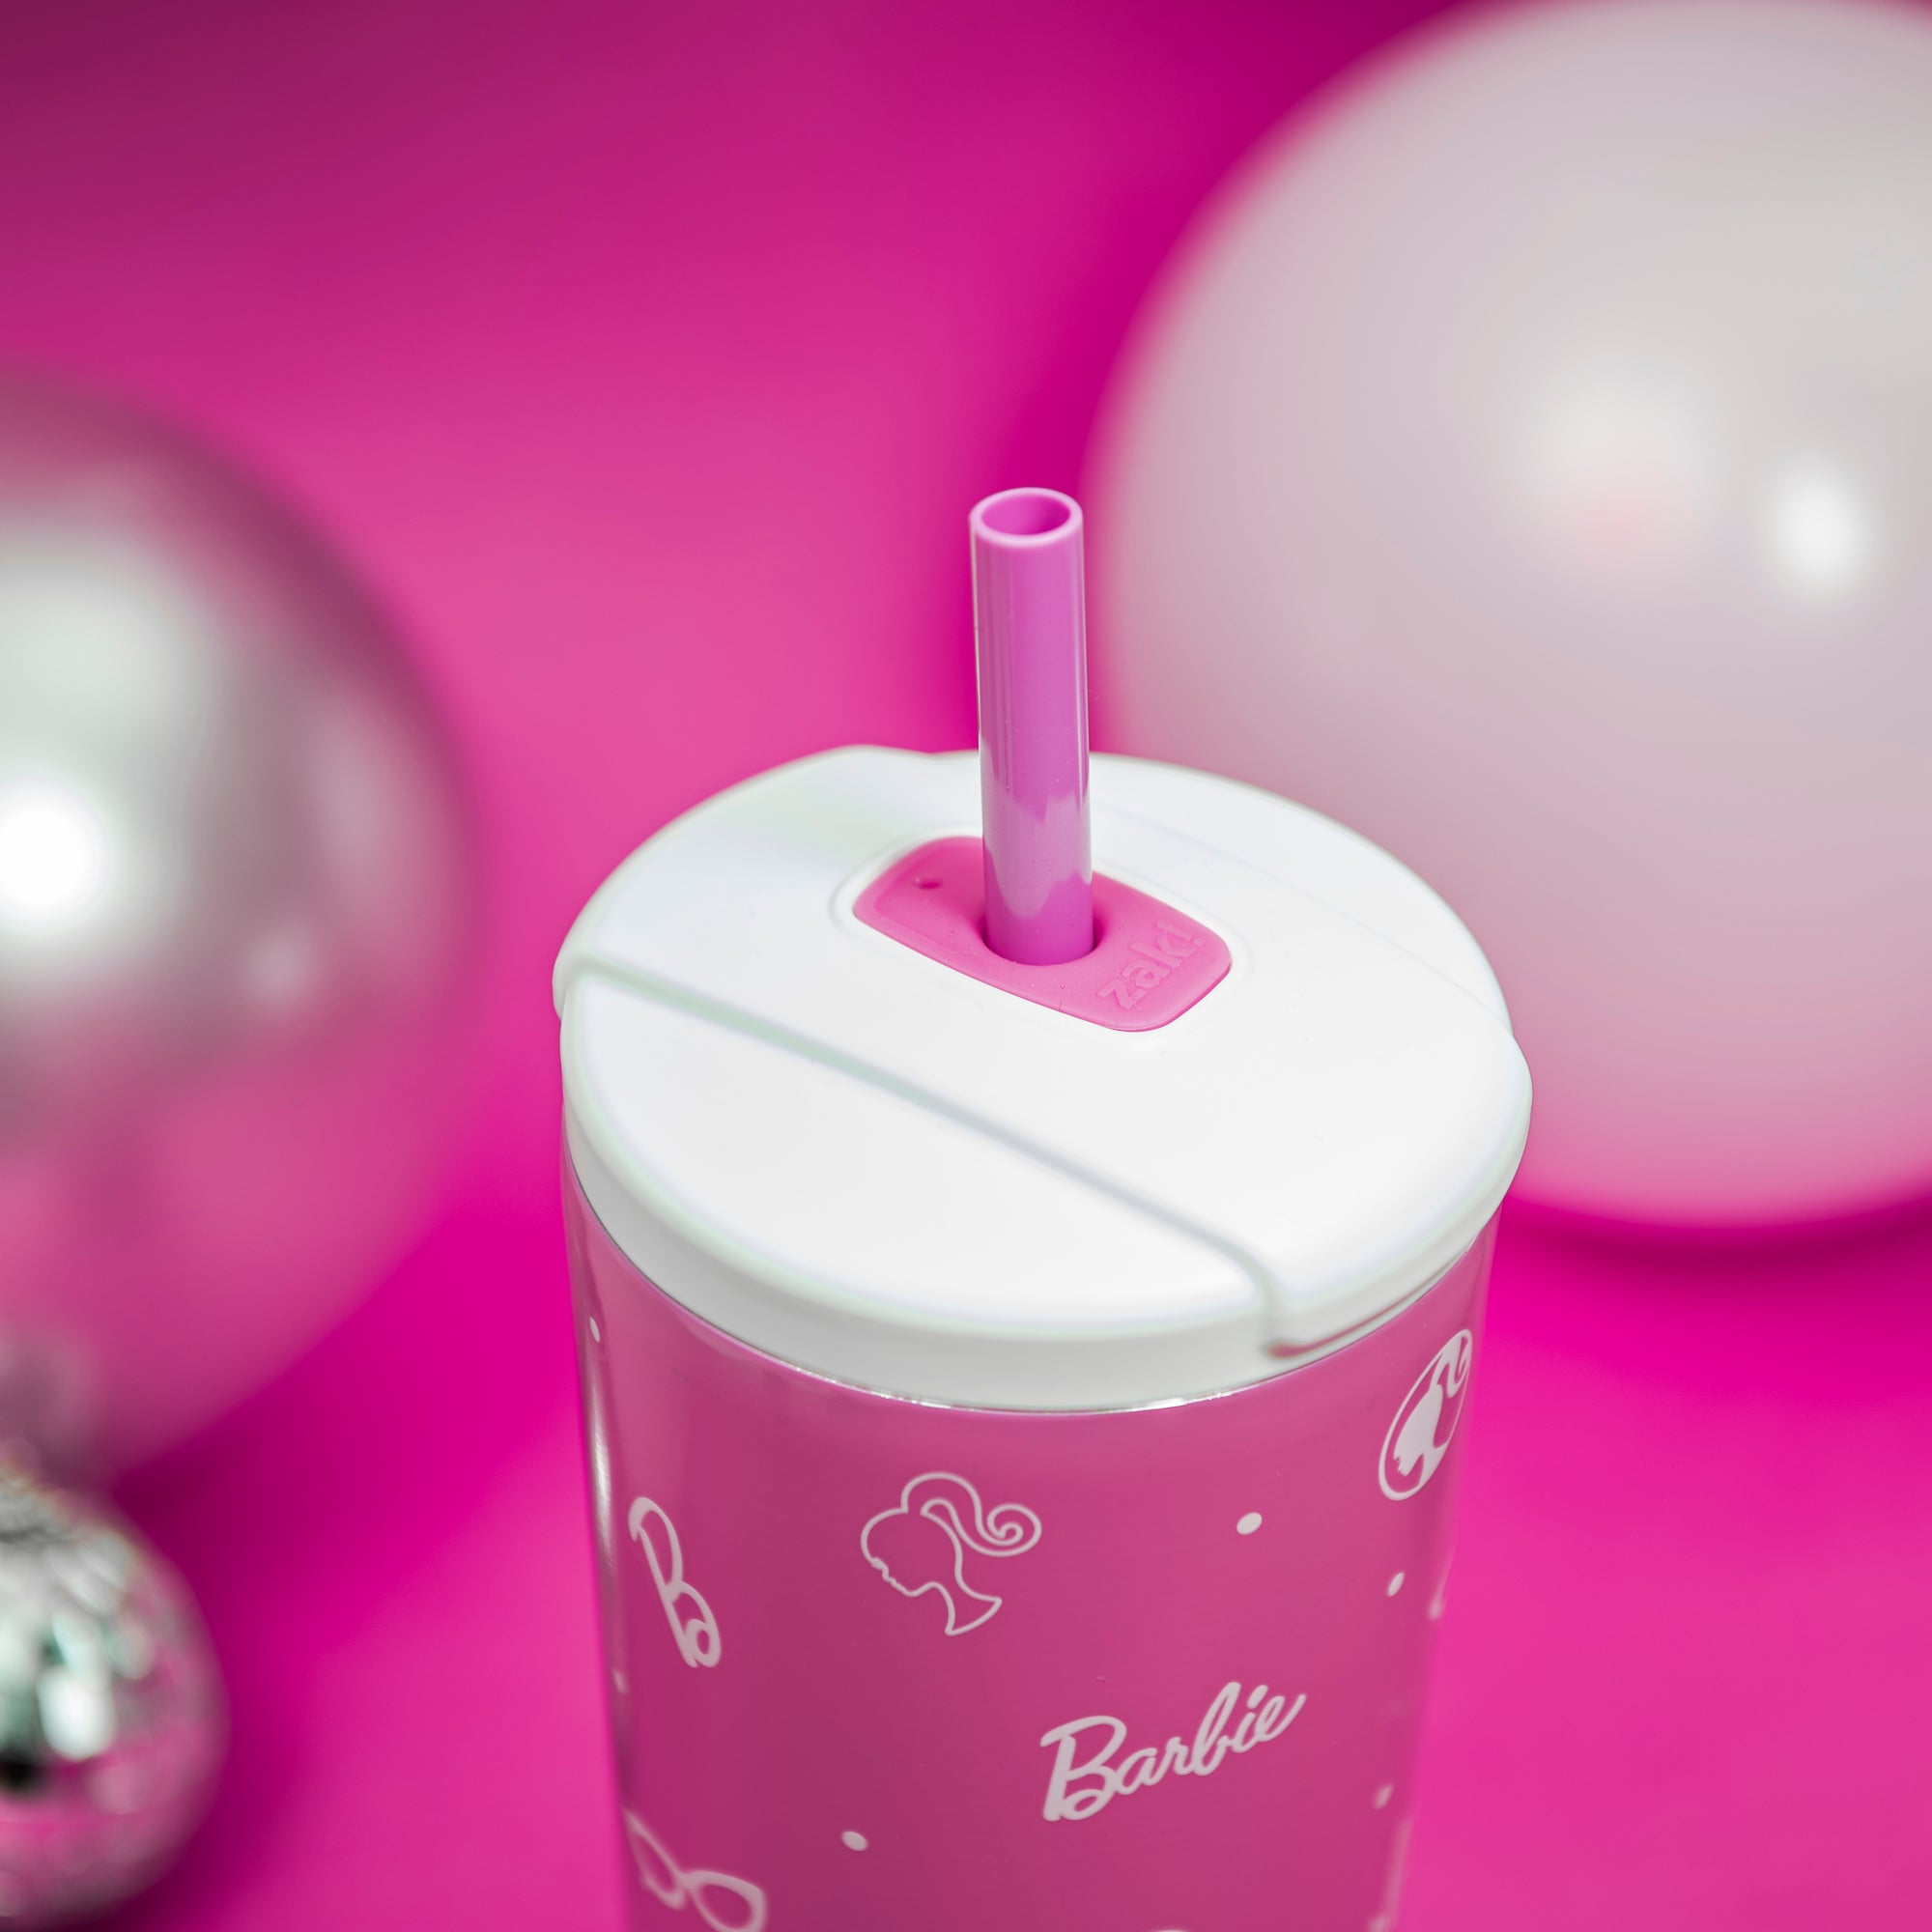 Barbie Beacon Insulated Cold Beverage Straw Tumbler - 24 ounces